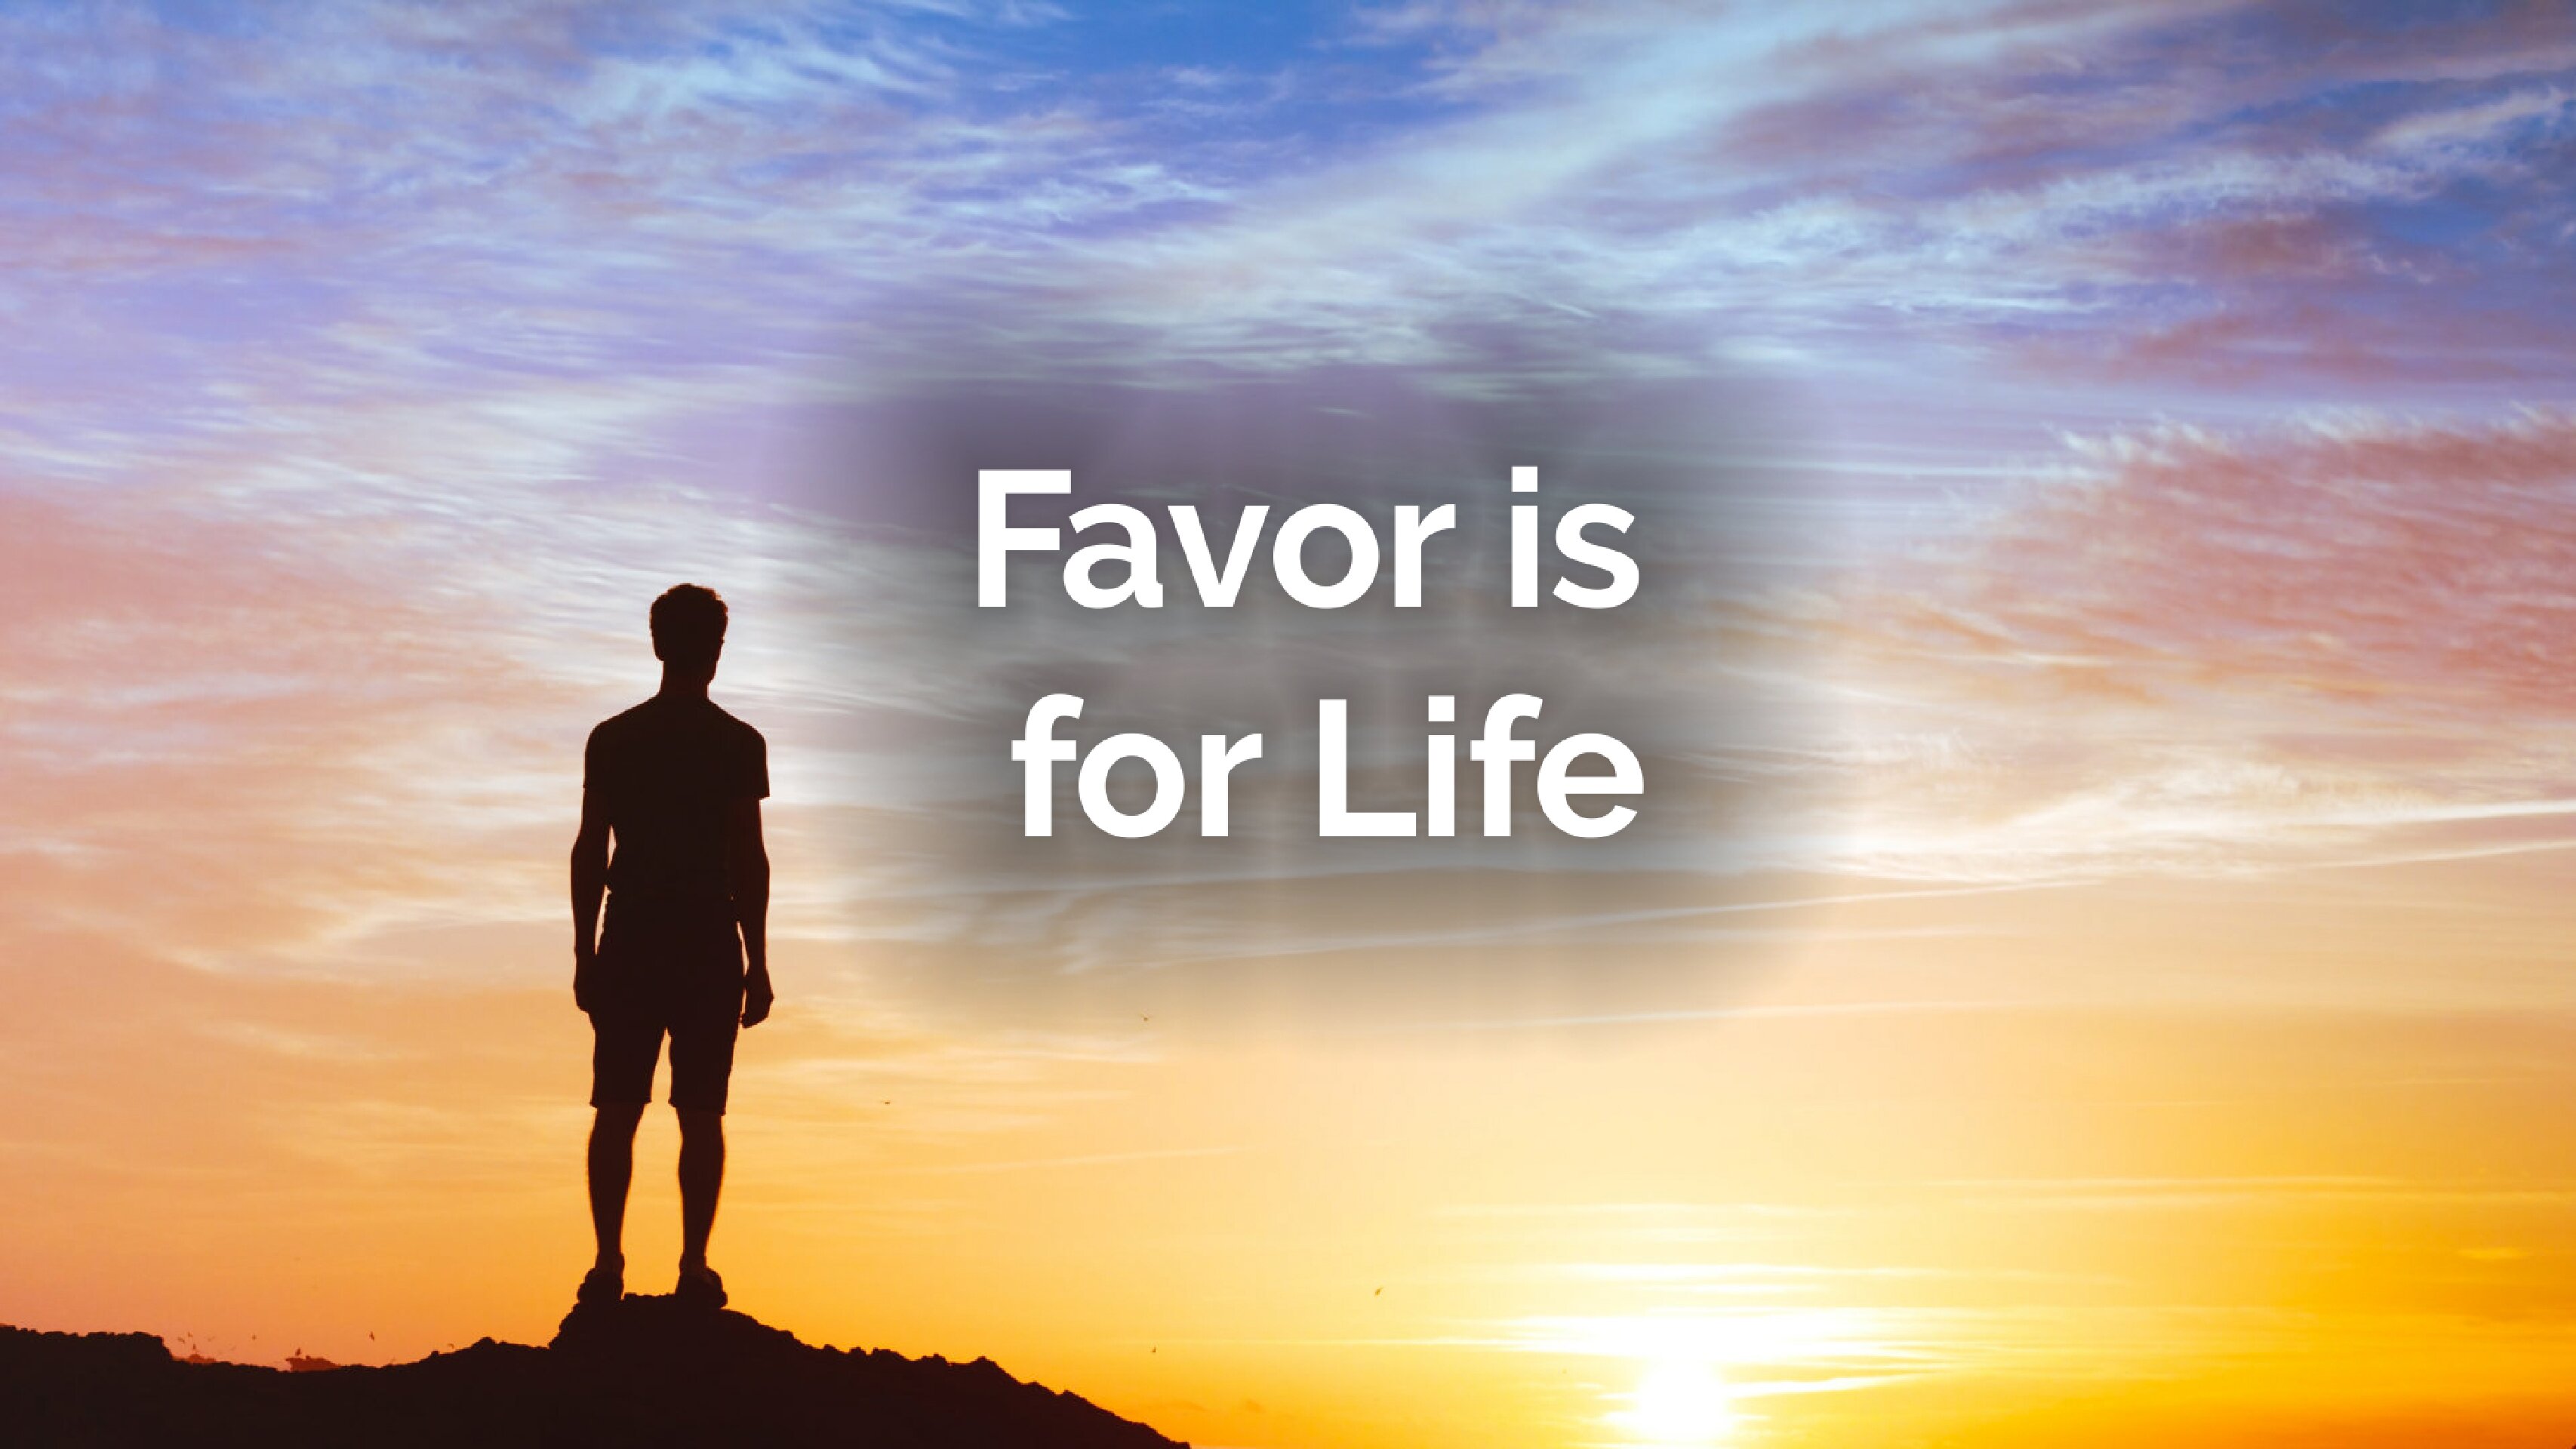 Favor is for Life